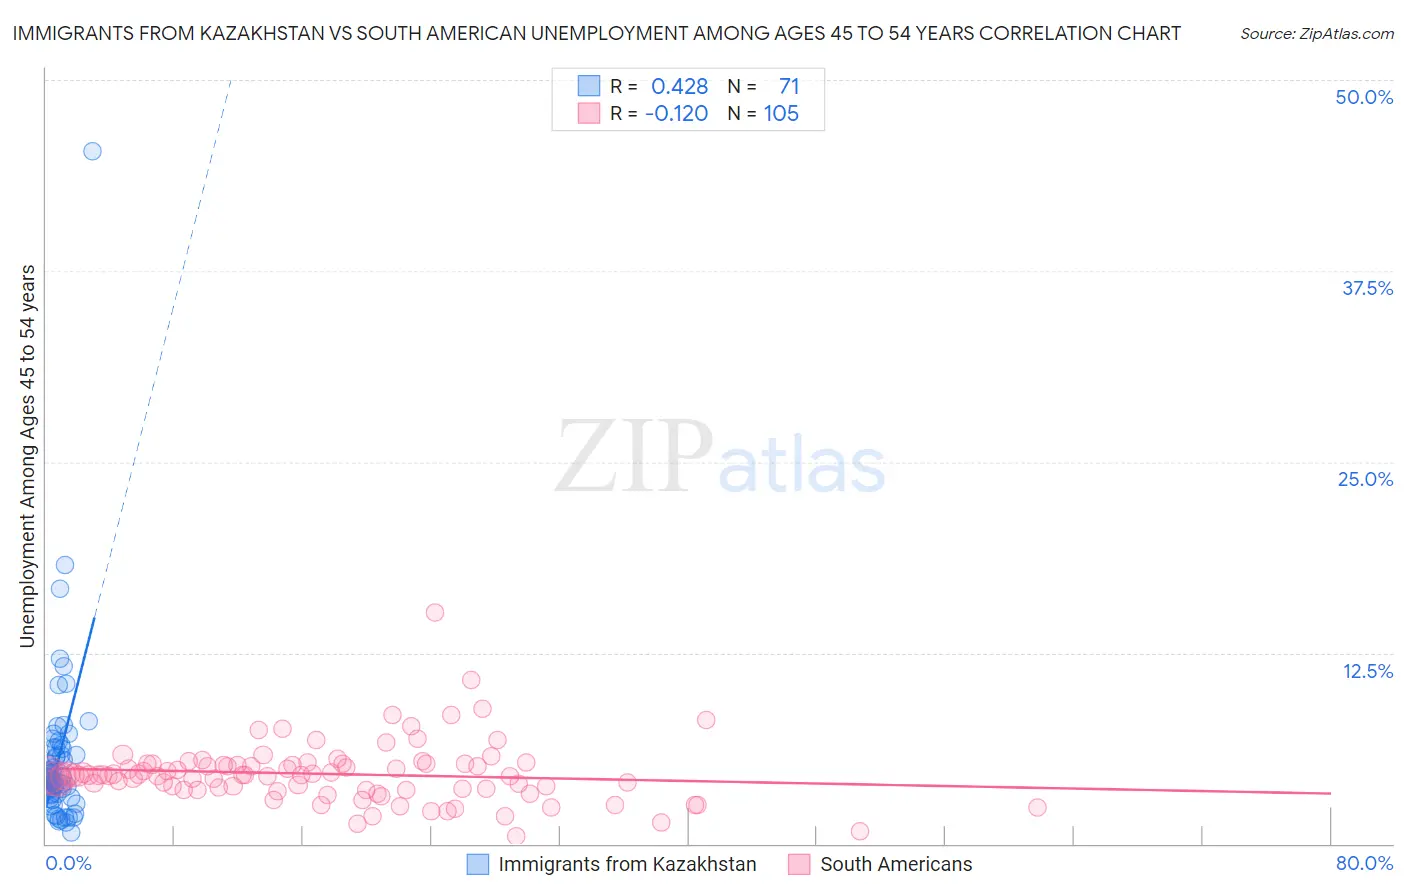 Immigrants from Kazakhstan vs South American Unemployment Among Ages 45 to 54 years